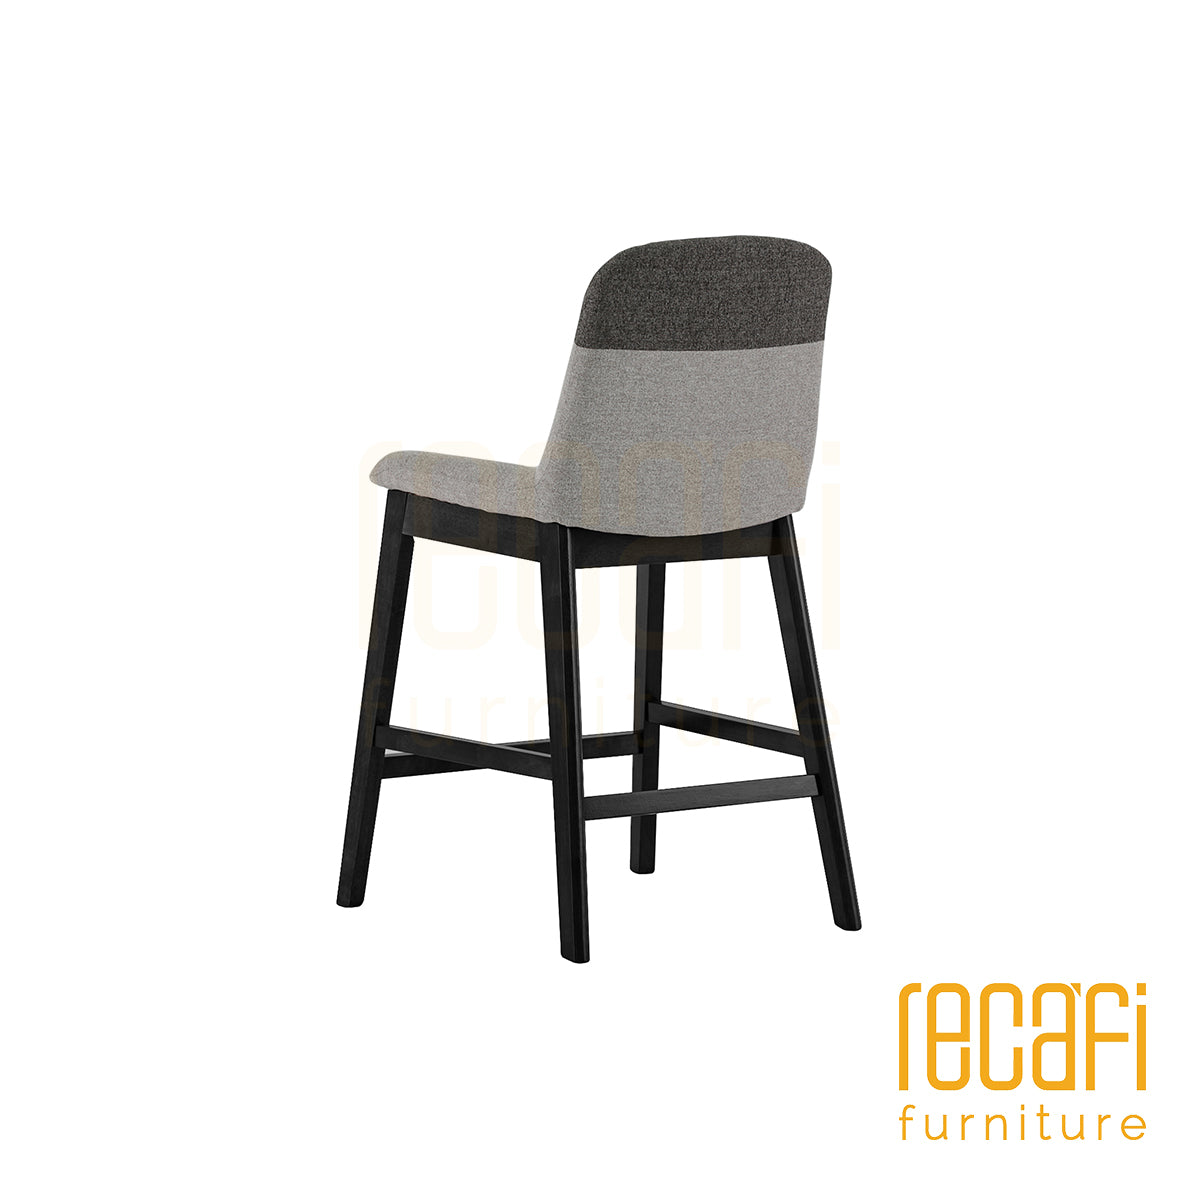 <b> Nook Counter Height Dining Chair </b><br> W480 X D540 X H950MM SEAT HEIGHT : 640MM